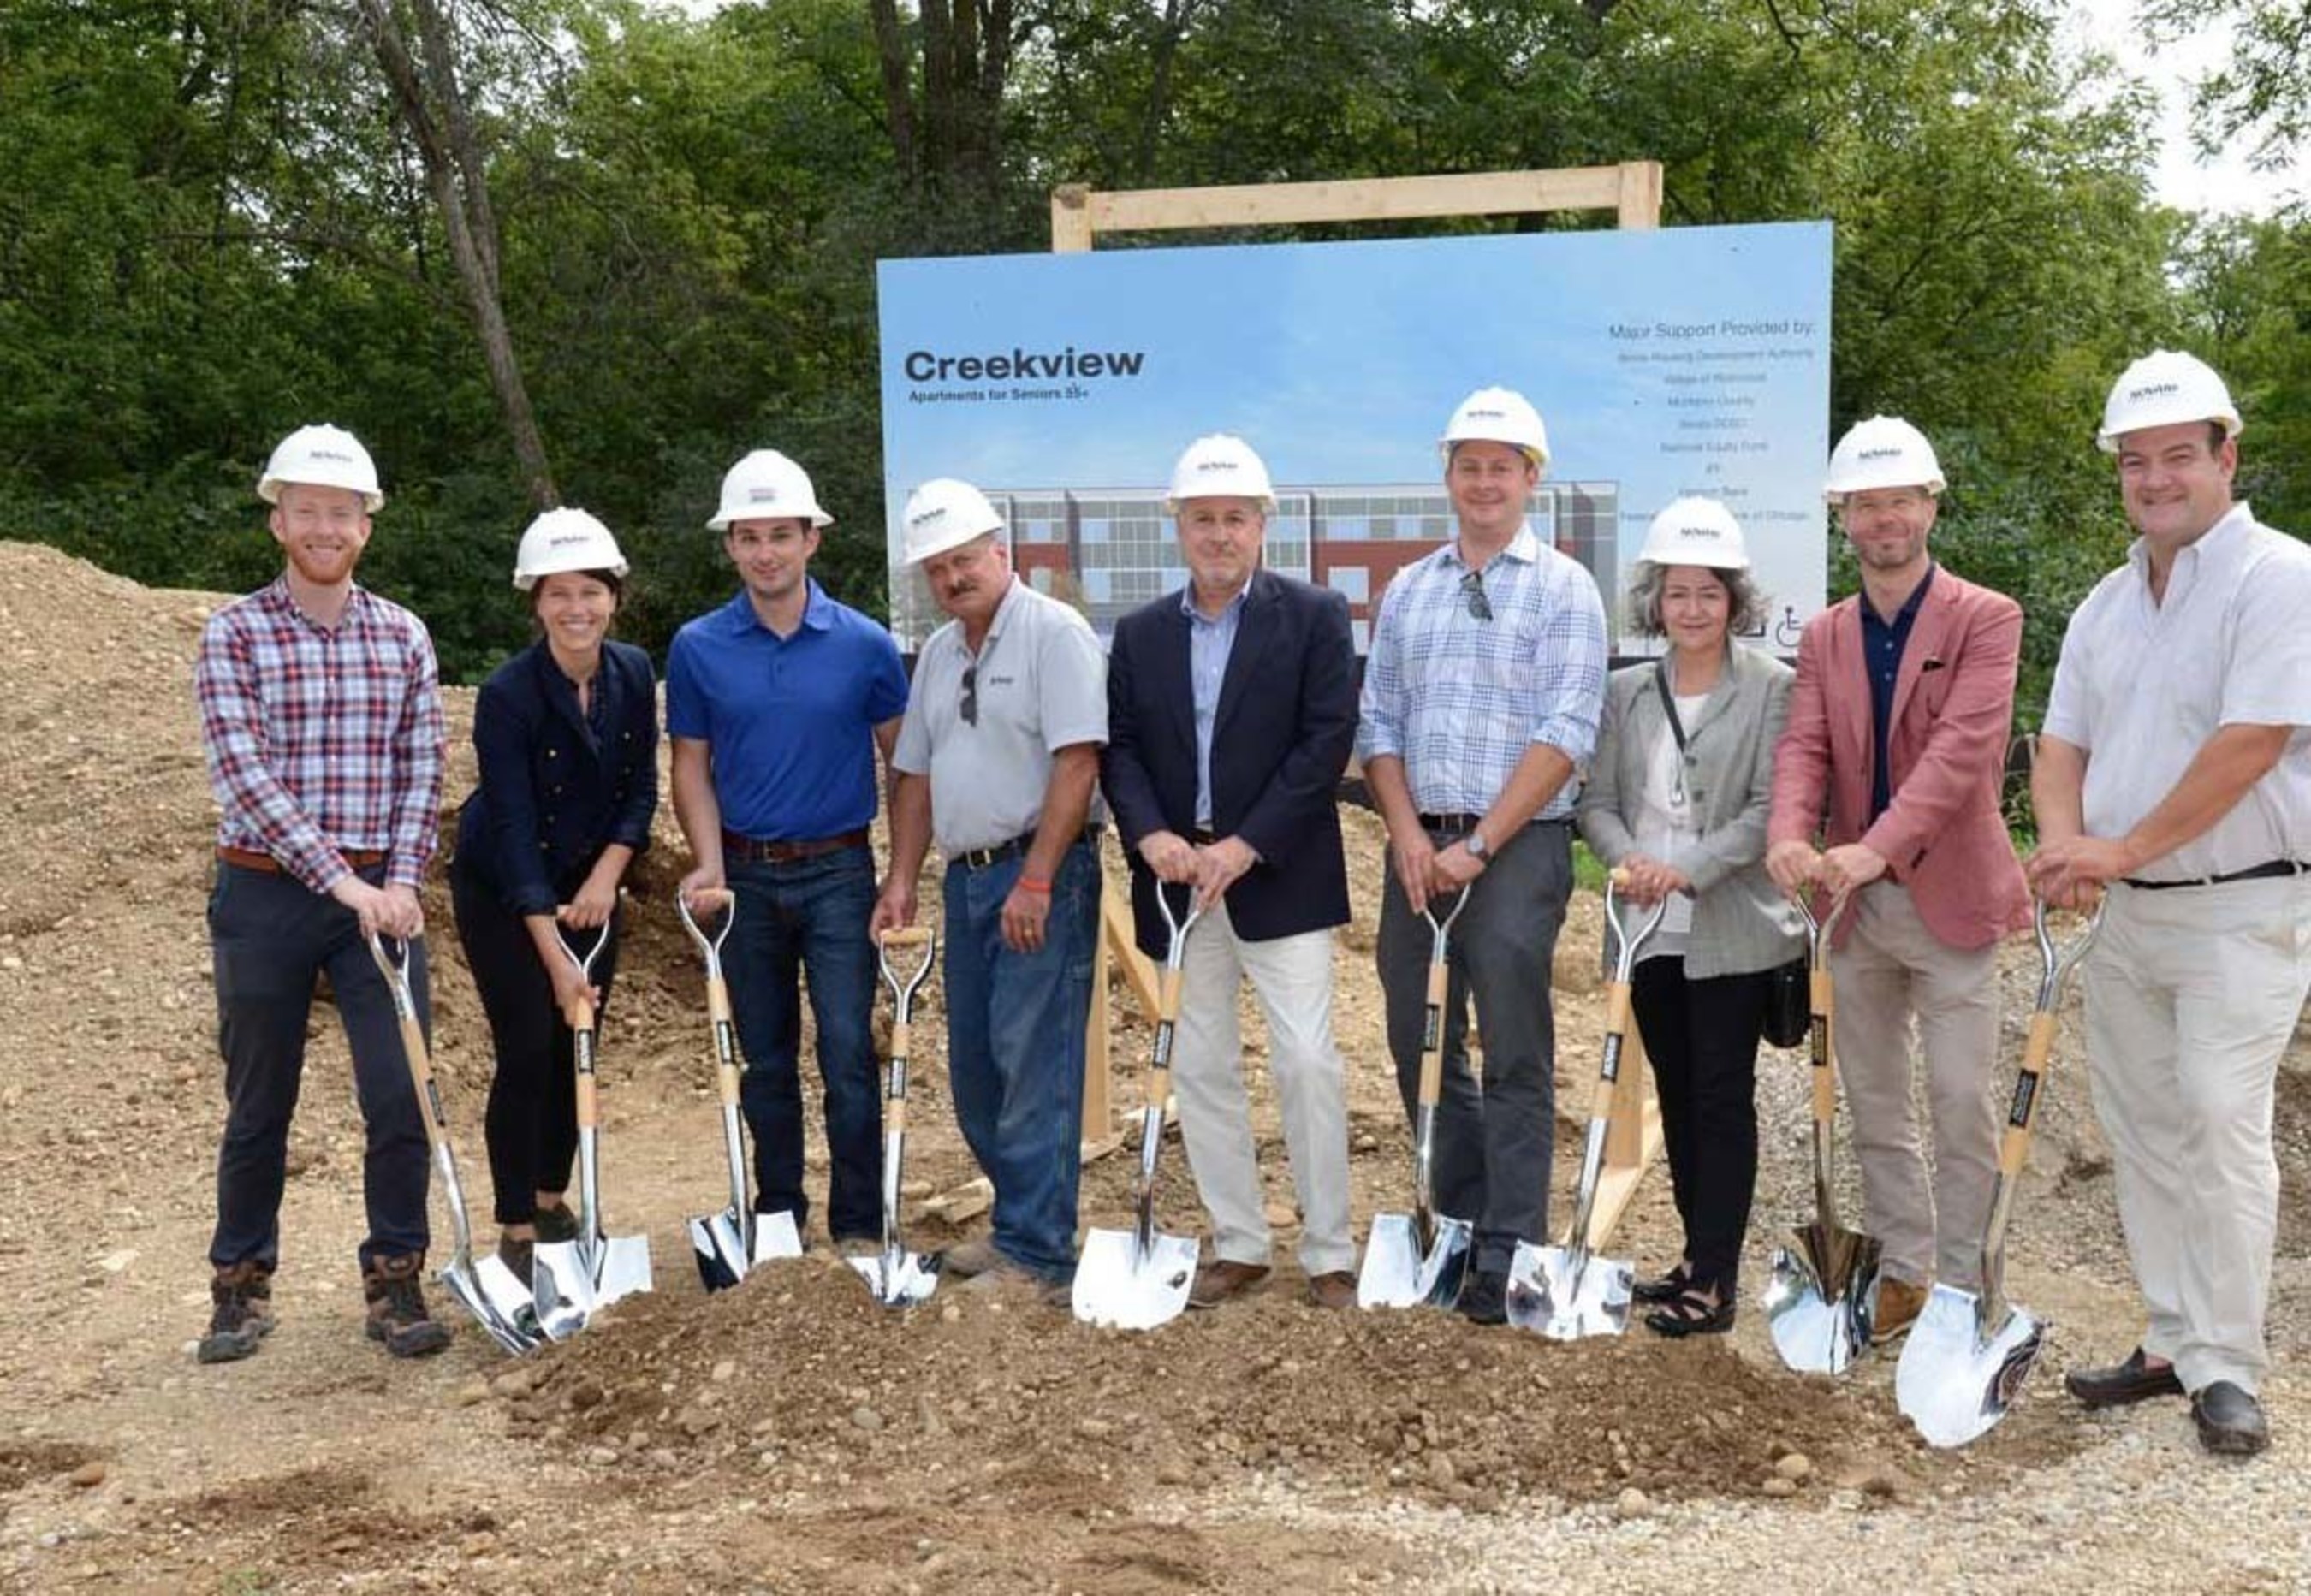 Creekview Construction Team (from left to right) Jordan Bartle, Full Circle Communities, Lindsey Haines, Full Circle Communities, Blake Harmon, Novak Construction, Jim Keiler, Novak Construction, Greg Terwilliger, Novak Construction, Ryan Solum, Manhard Consulting, Therese Thompson, Cordogan Clark & Associates, Joshua Wilmoth, Full Circle Communities and Charles "Chip" Eldredge III, Charles Eldredge Real Estate.